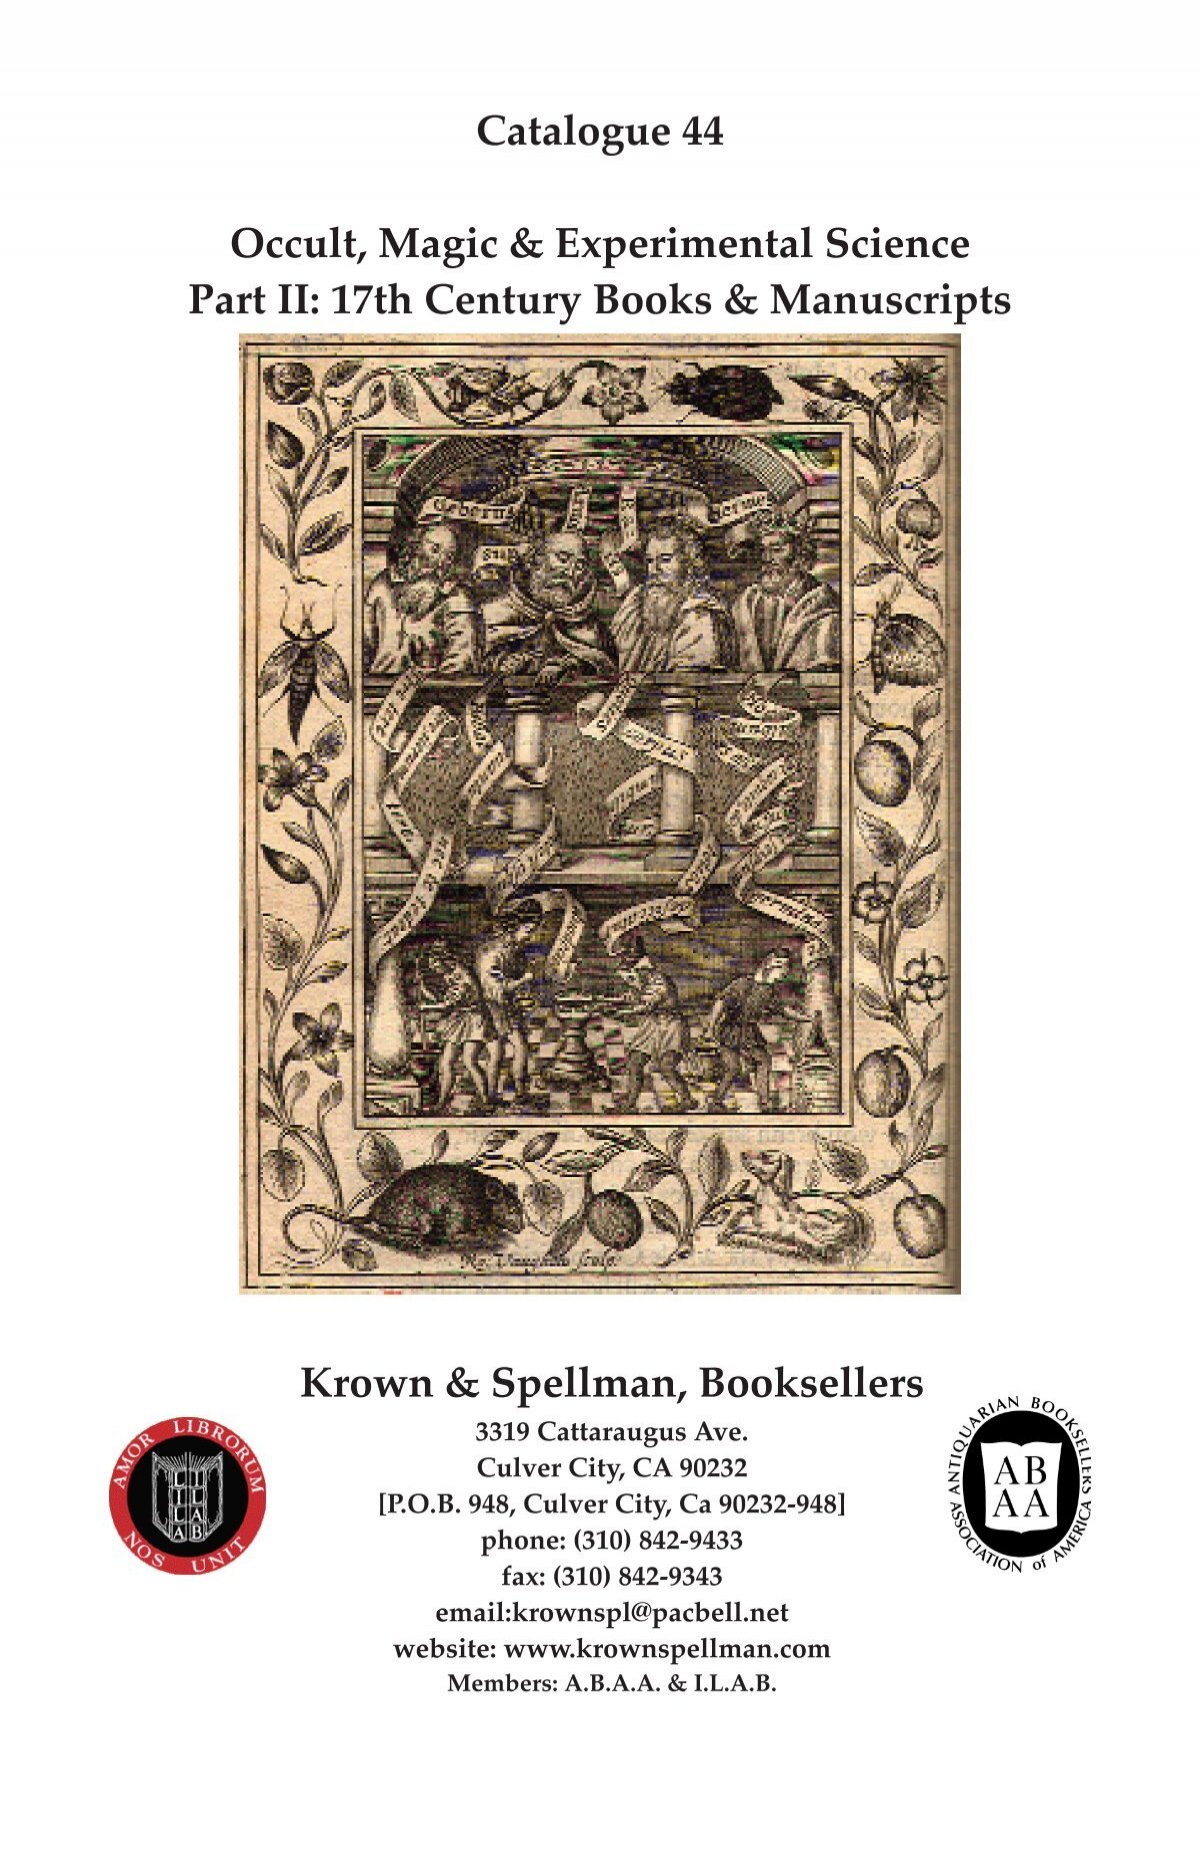 CATALOGUE 44: 17th Century Occult Books - Krown and Spellman